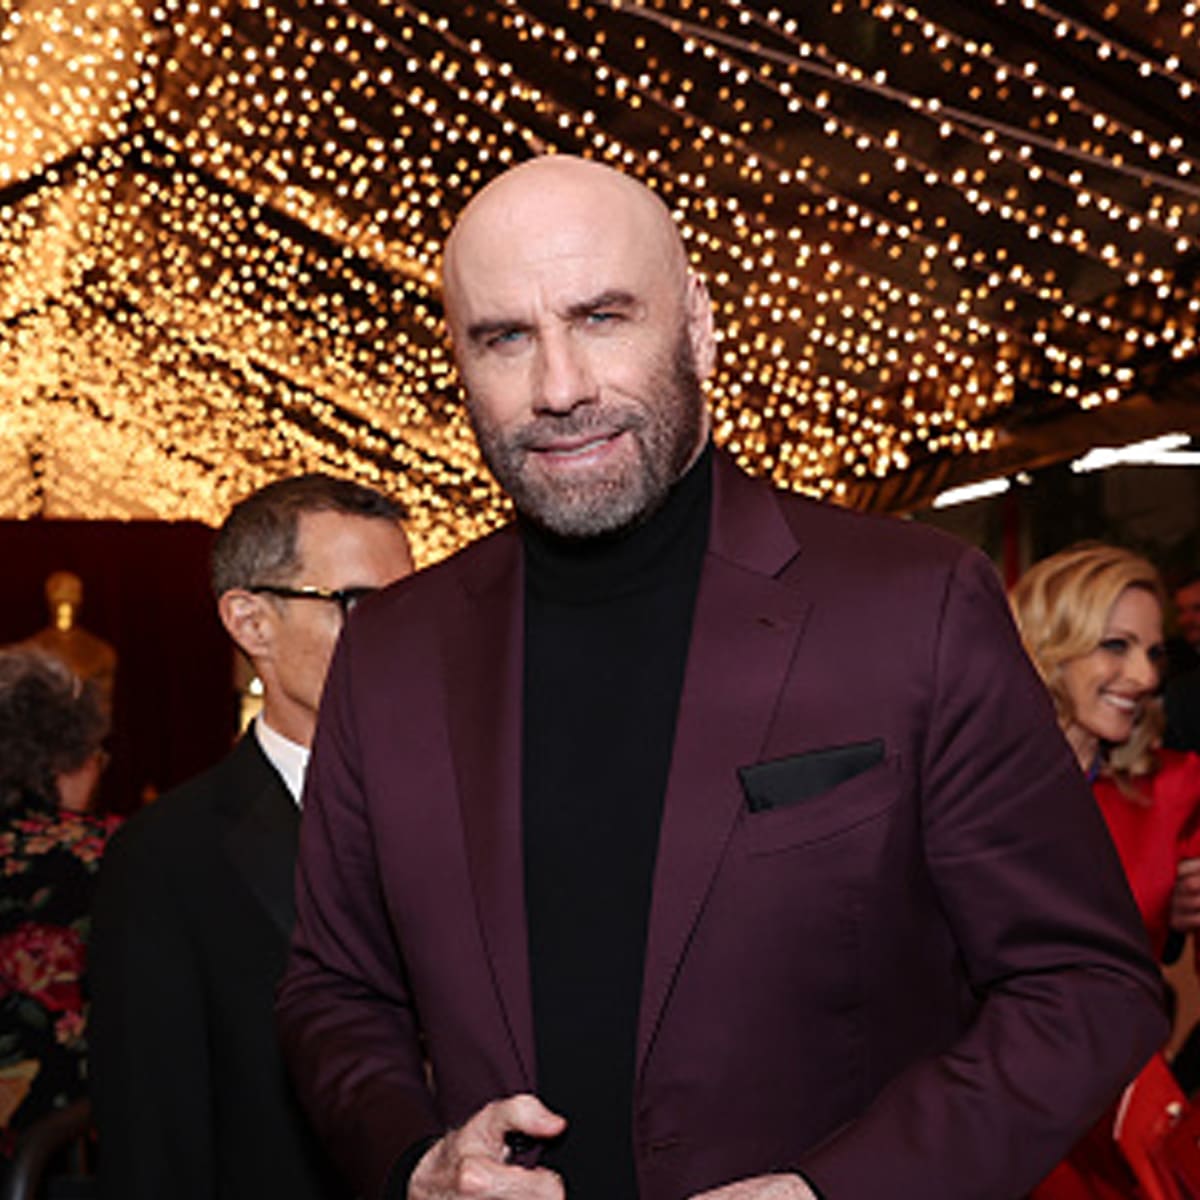 John Travolta attends the Governors Ball during the 94th Annual Academy Awards